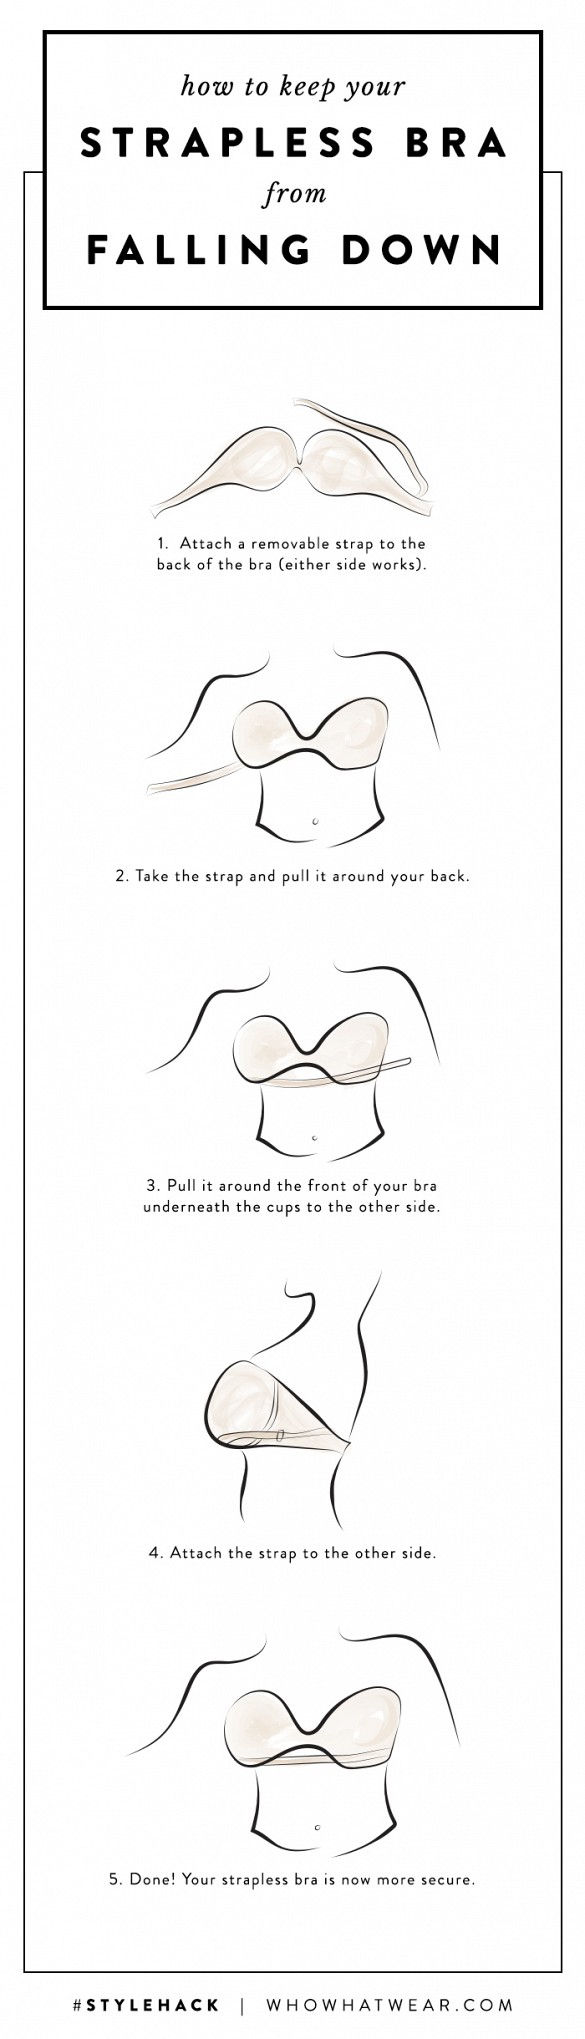 Easy Trick to Keep Your Strapless Bra From Falling Down